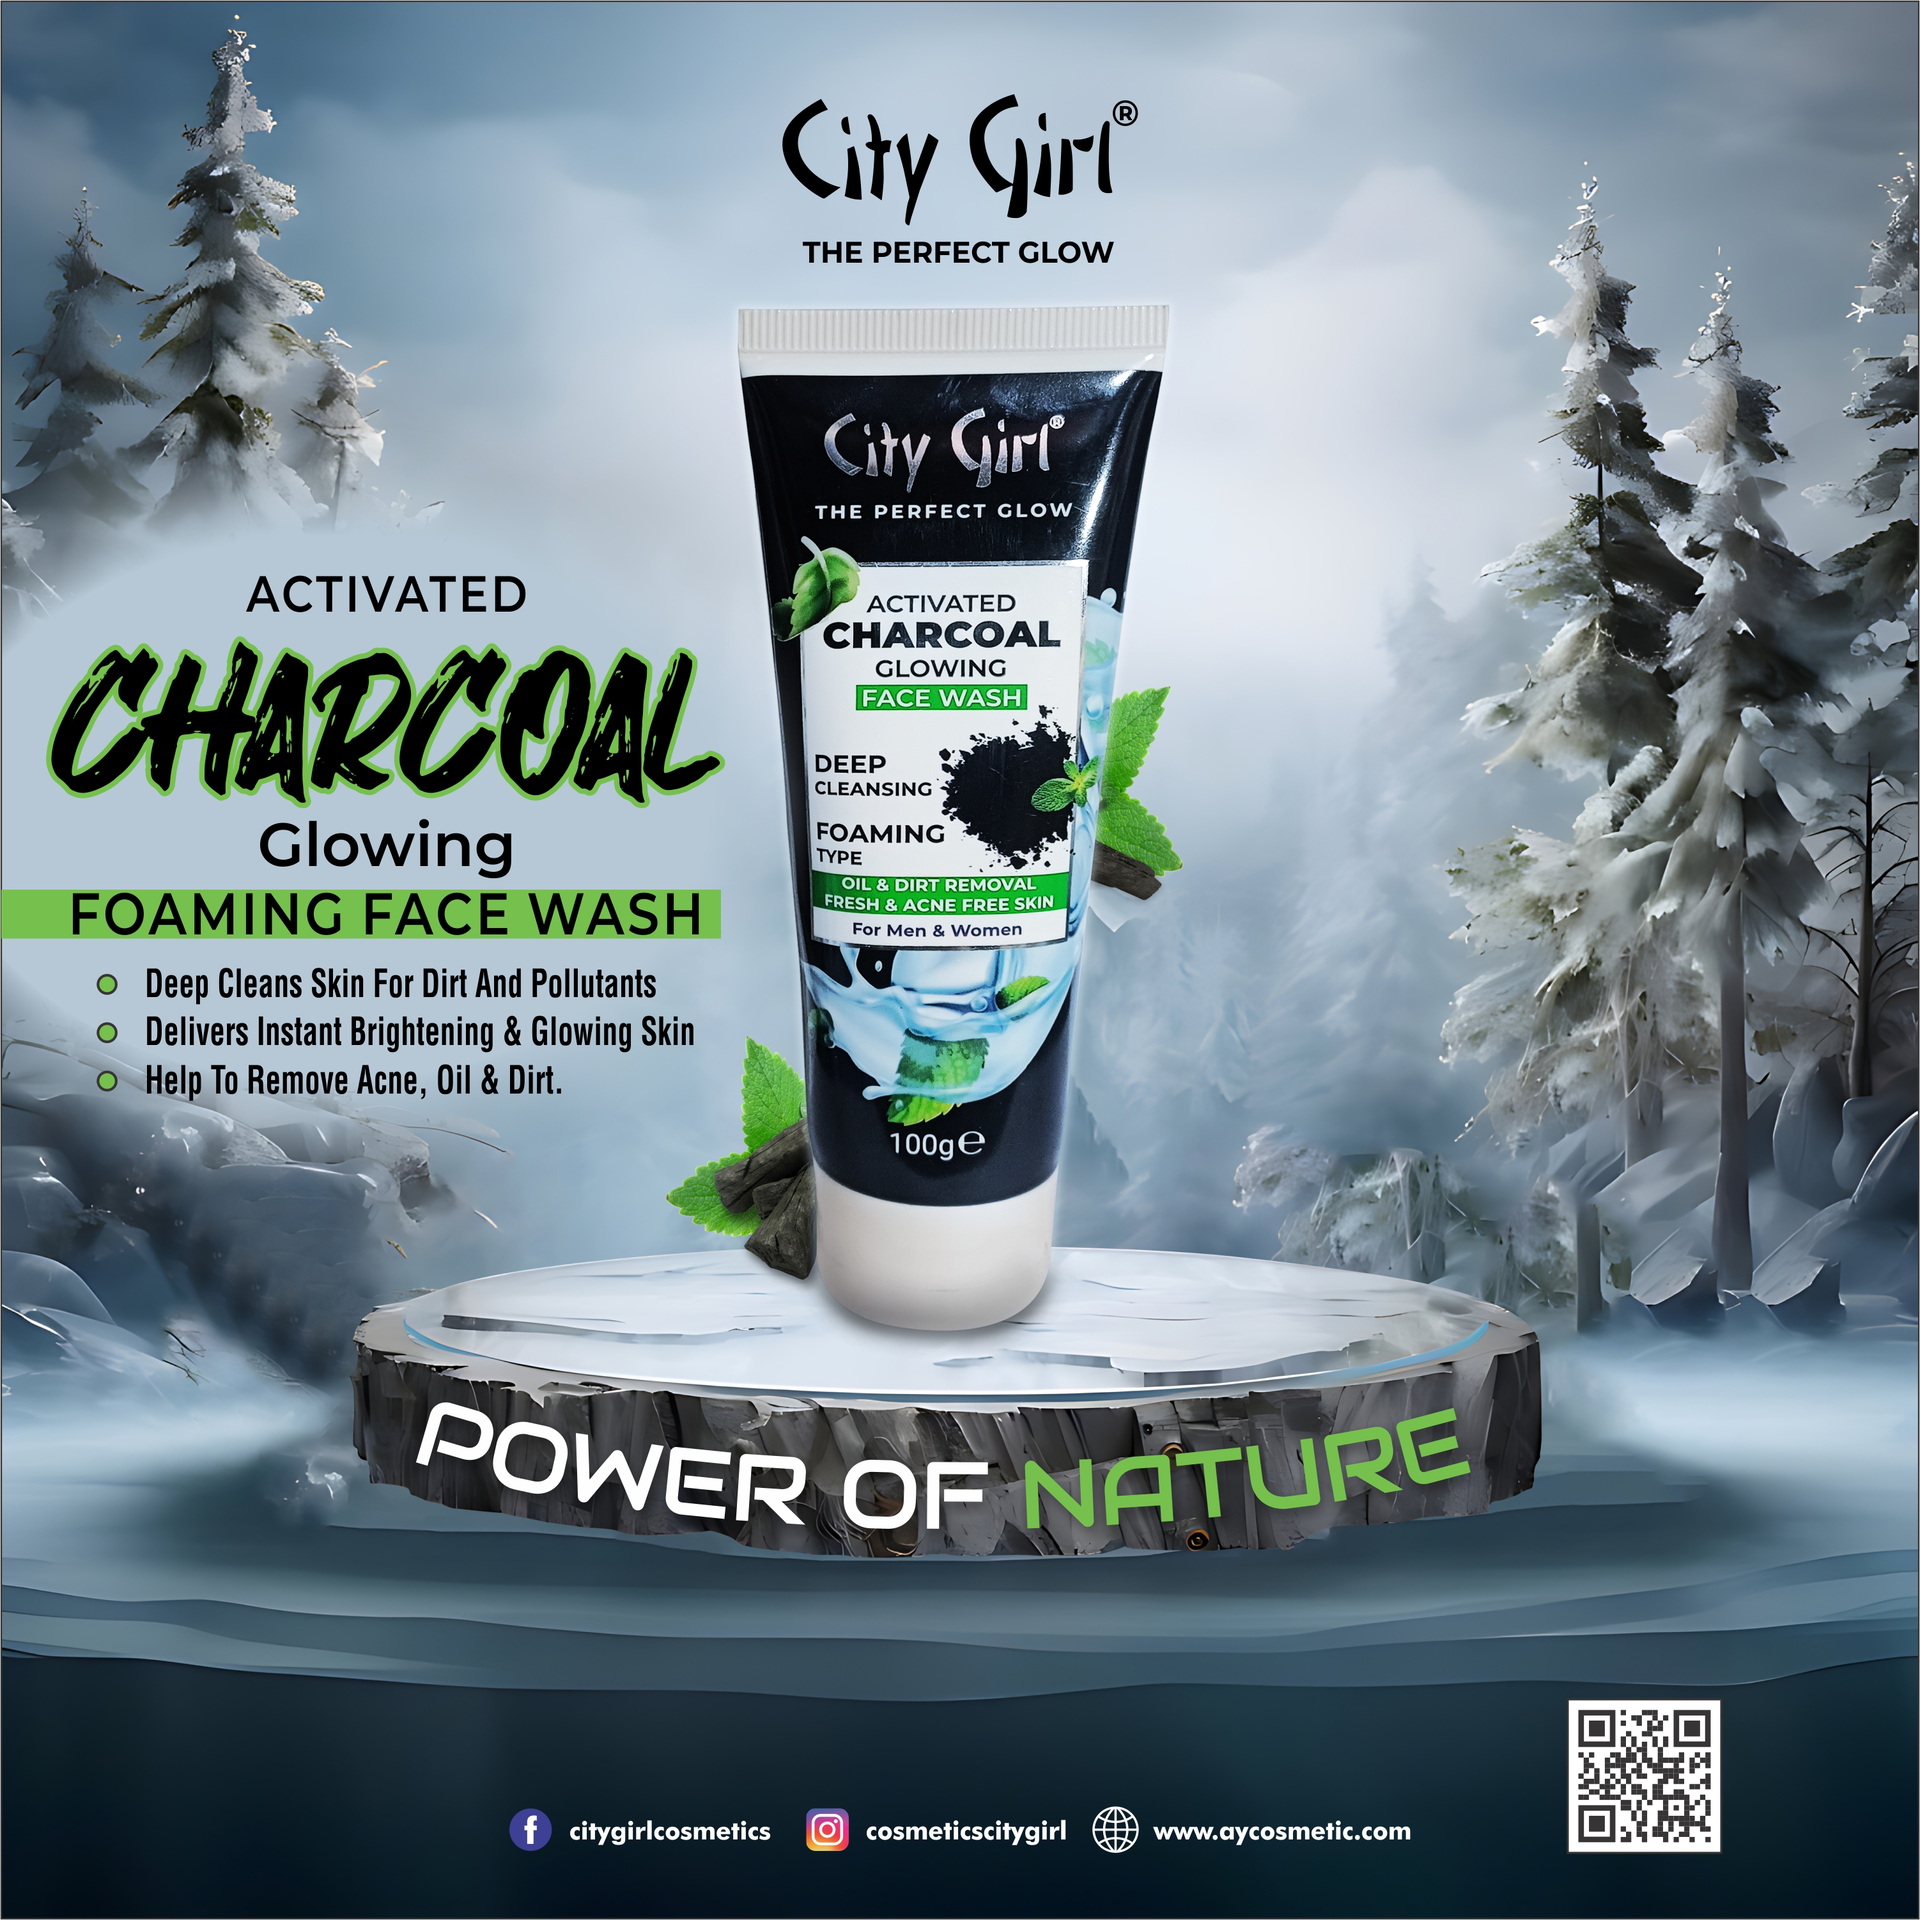 Charcoal Facewash, City Girl Charcoal Facewash, Activated, Charcoal, Glowing, Face wash, Deep Cleansing, Foaming Type, Oil & Dirt Removal, For Men & Women